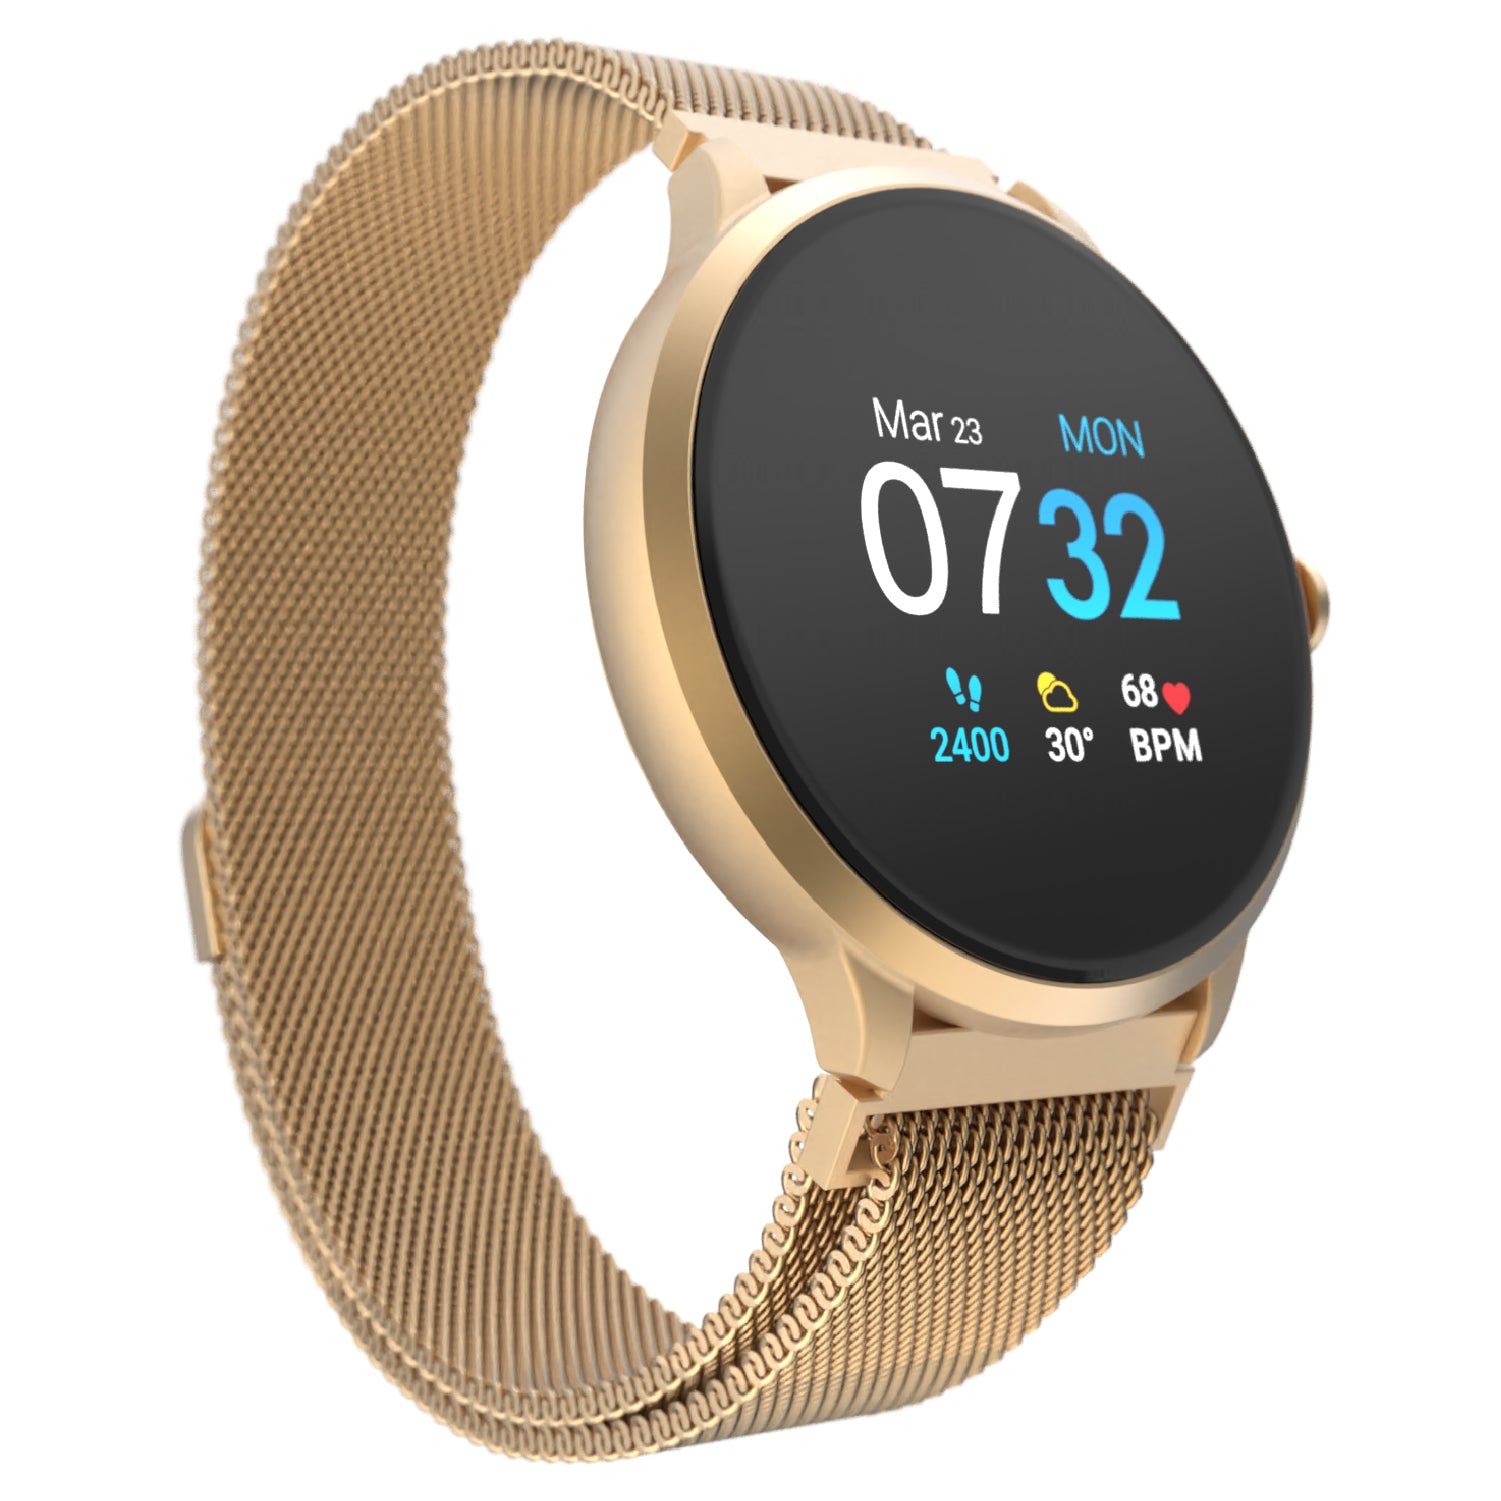 iTouch Sport 3 Smartwatch in Gold with Gold Mesh Strap